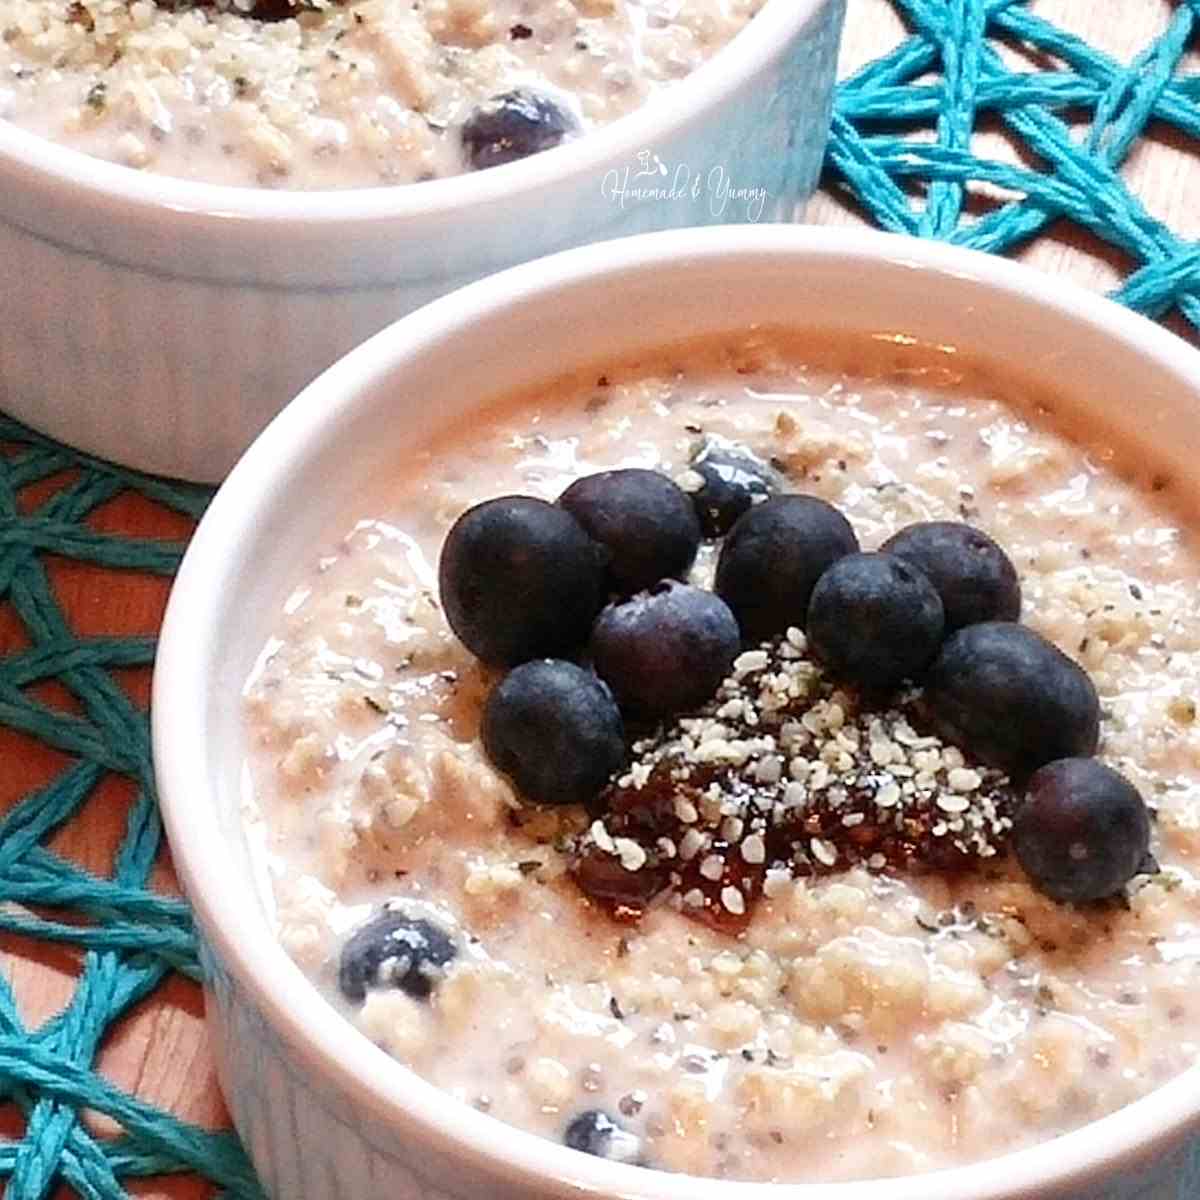 Rise and Shine with Sunrise Oats Overnight: A Delicious Breakfast https://firehousewinebar.com/web-stories/sunrise-oats-overnight/